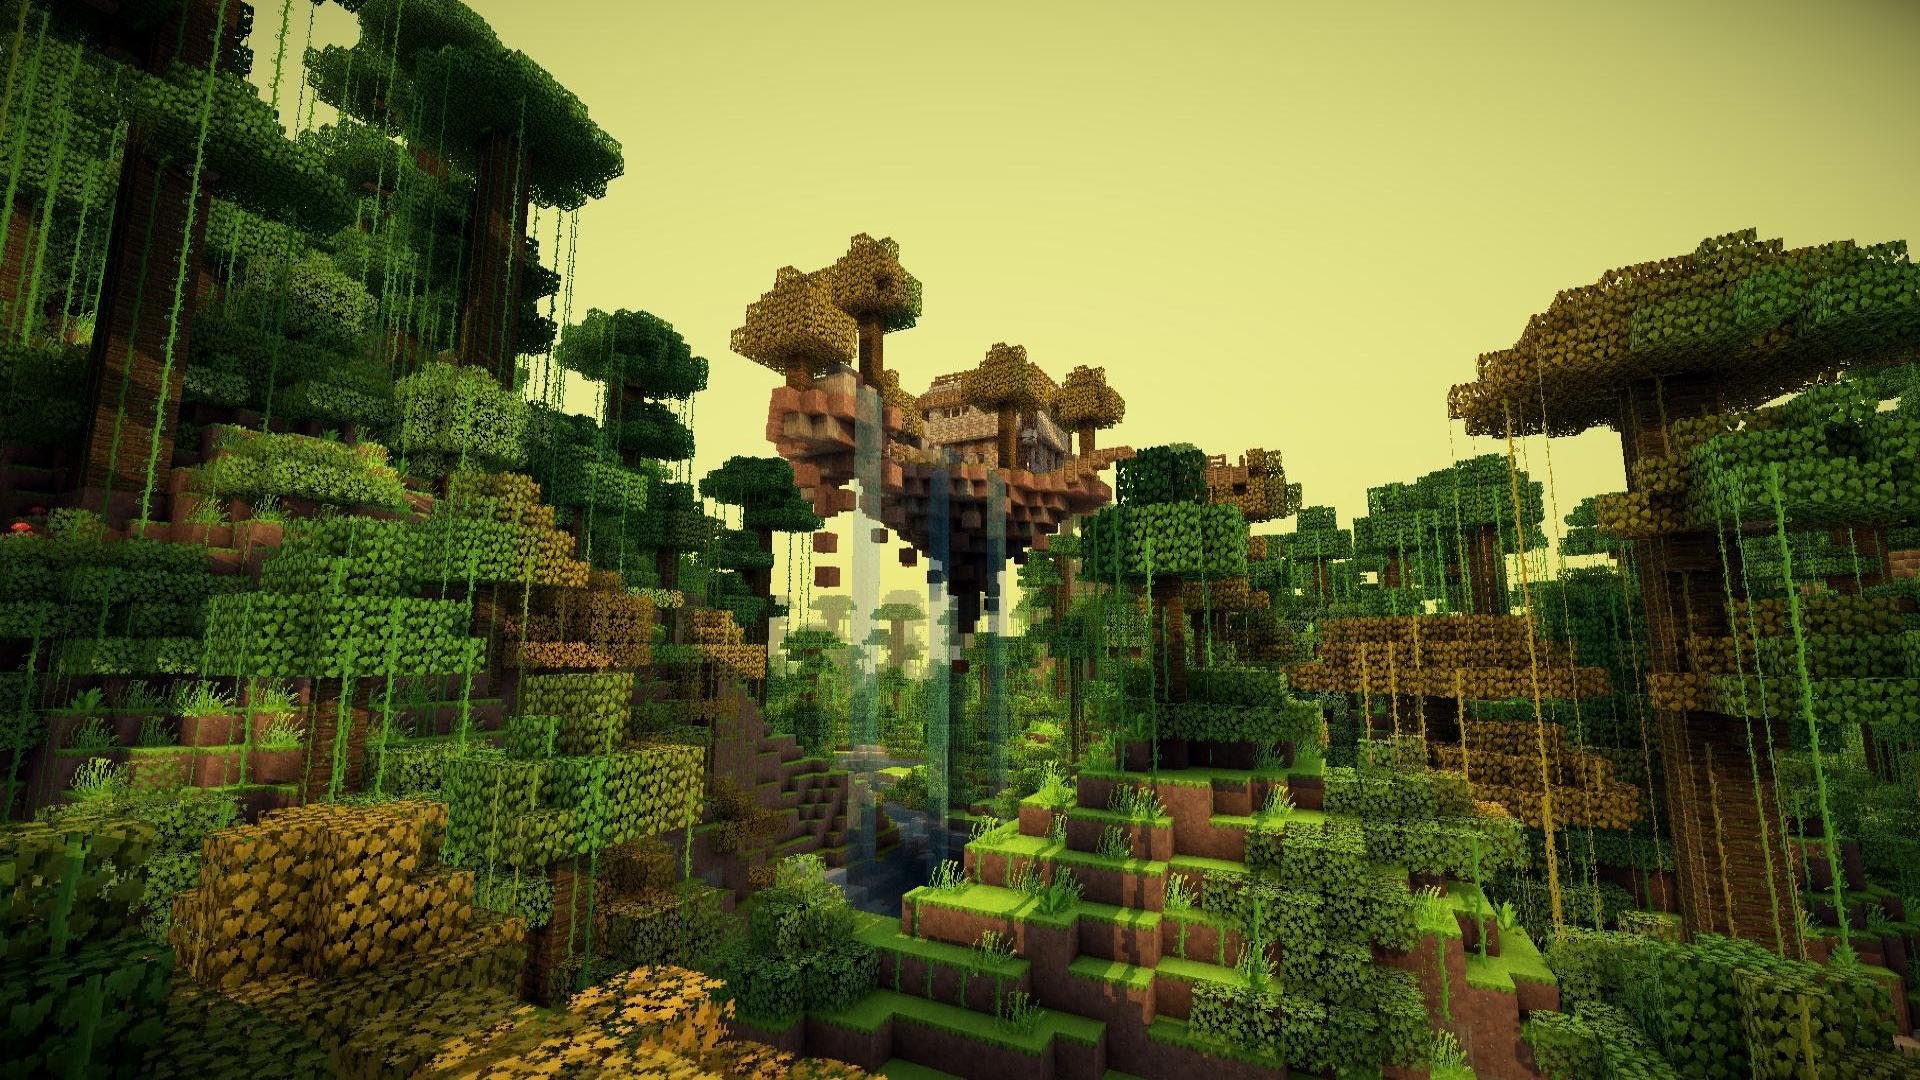 Jungle in the Minecraft game